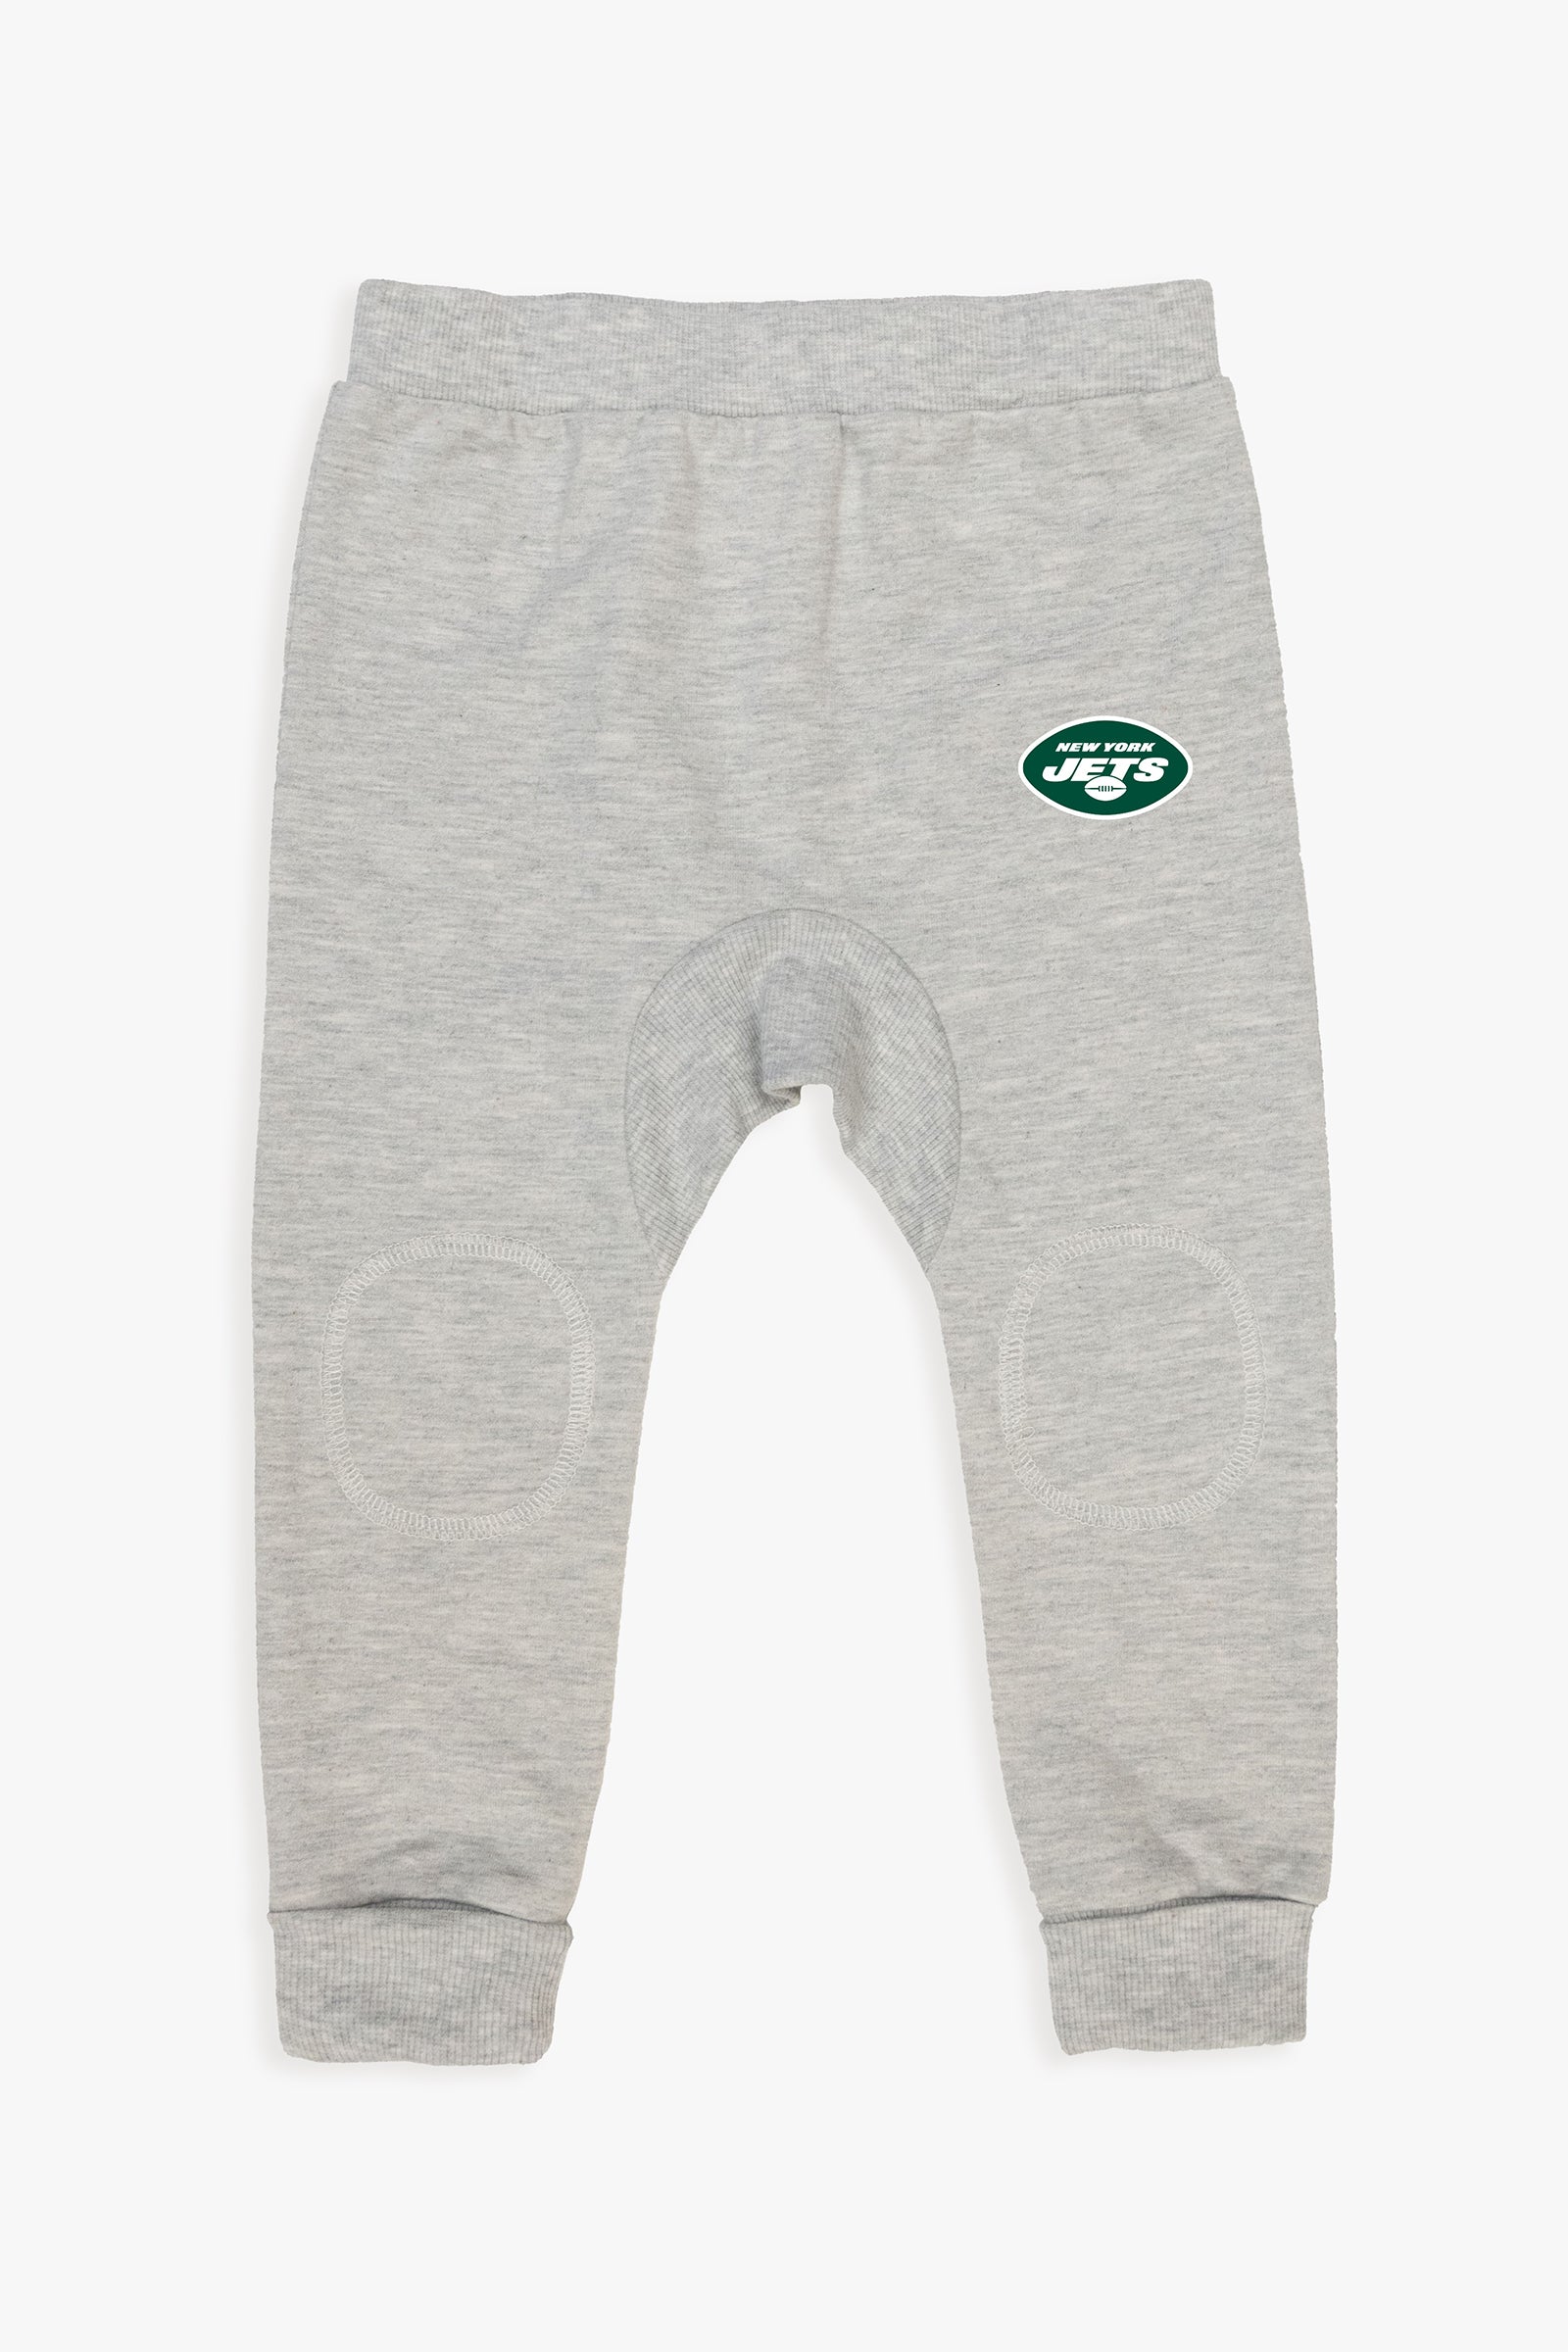 NFL Toddler Grey French Terry Pants